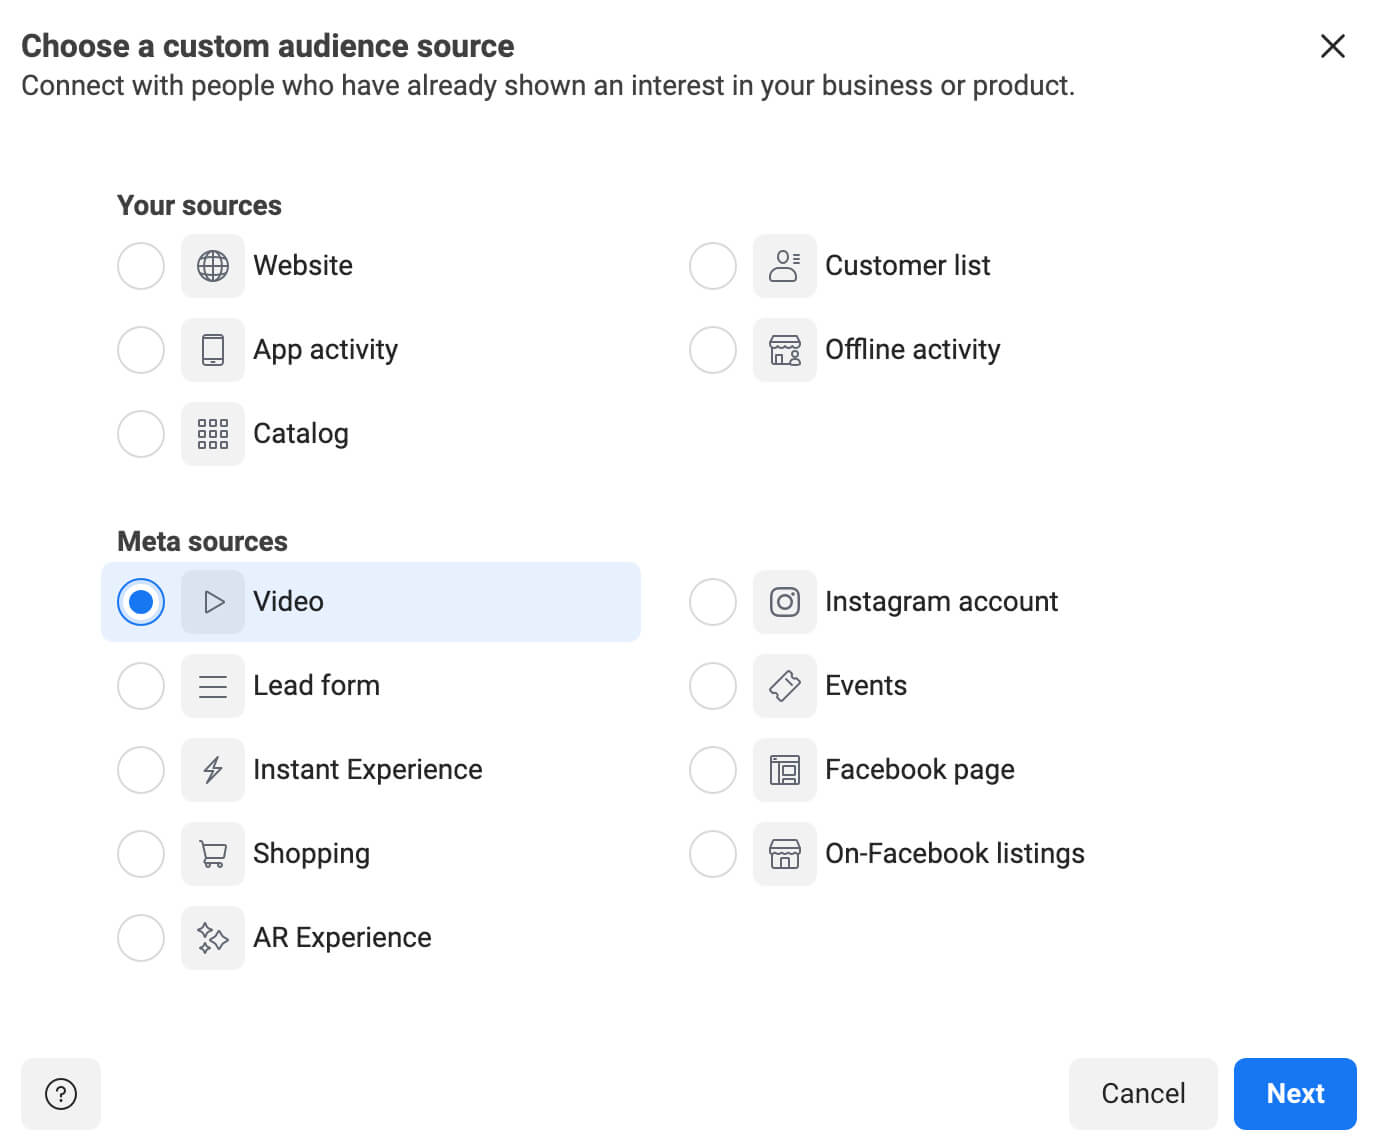 facebook-ads-qualify-leads-automatically-with-conditional-logic-set-target-audience-choose-custom-audience-source-4